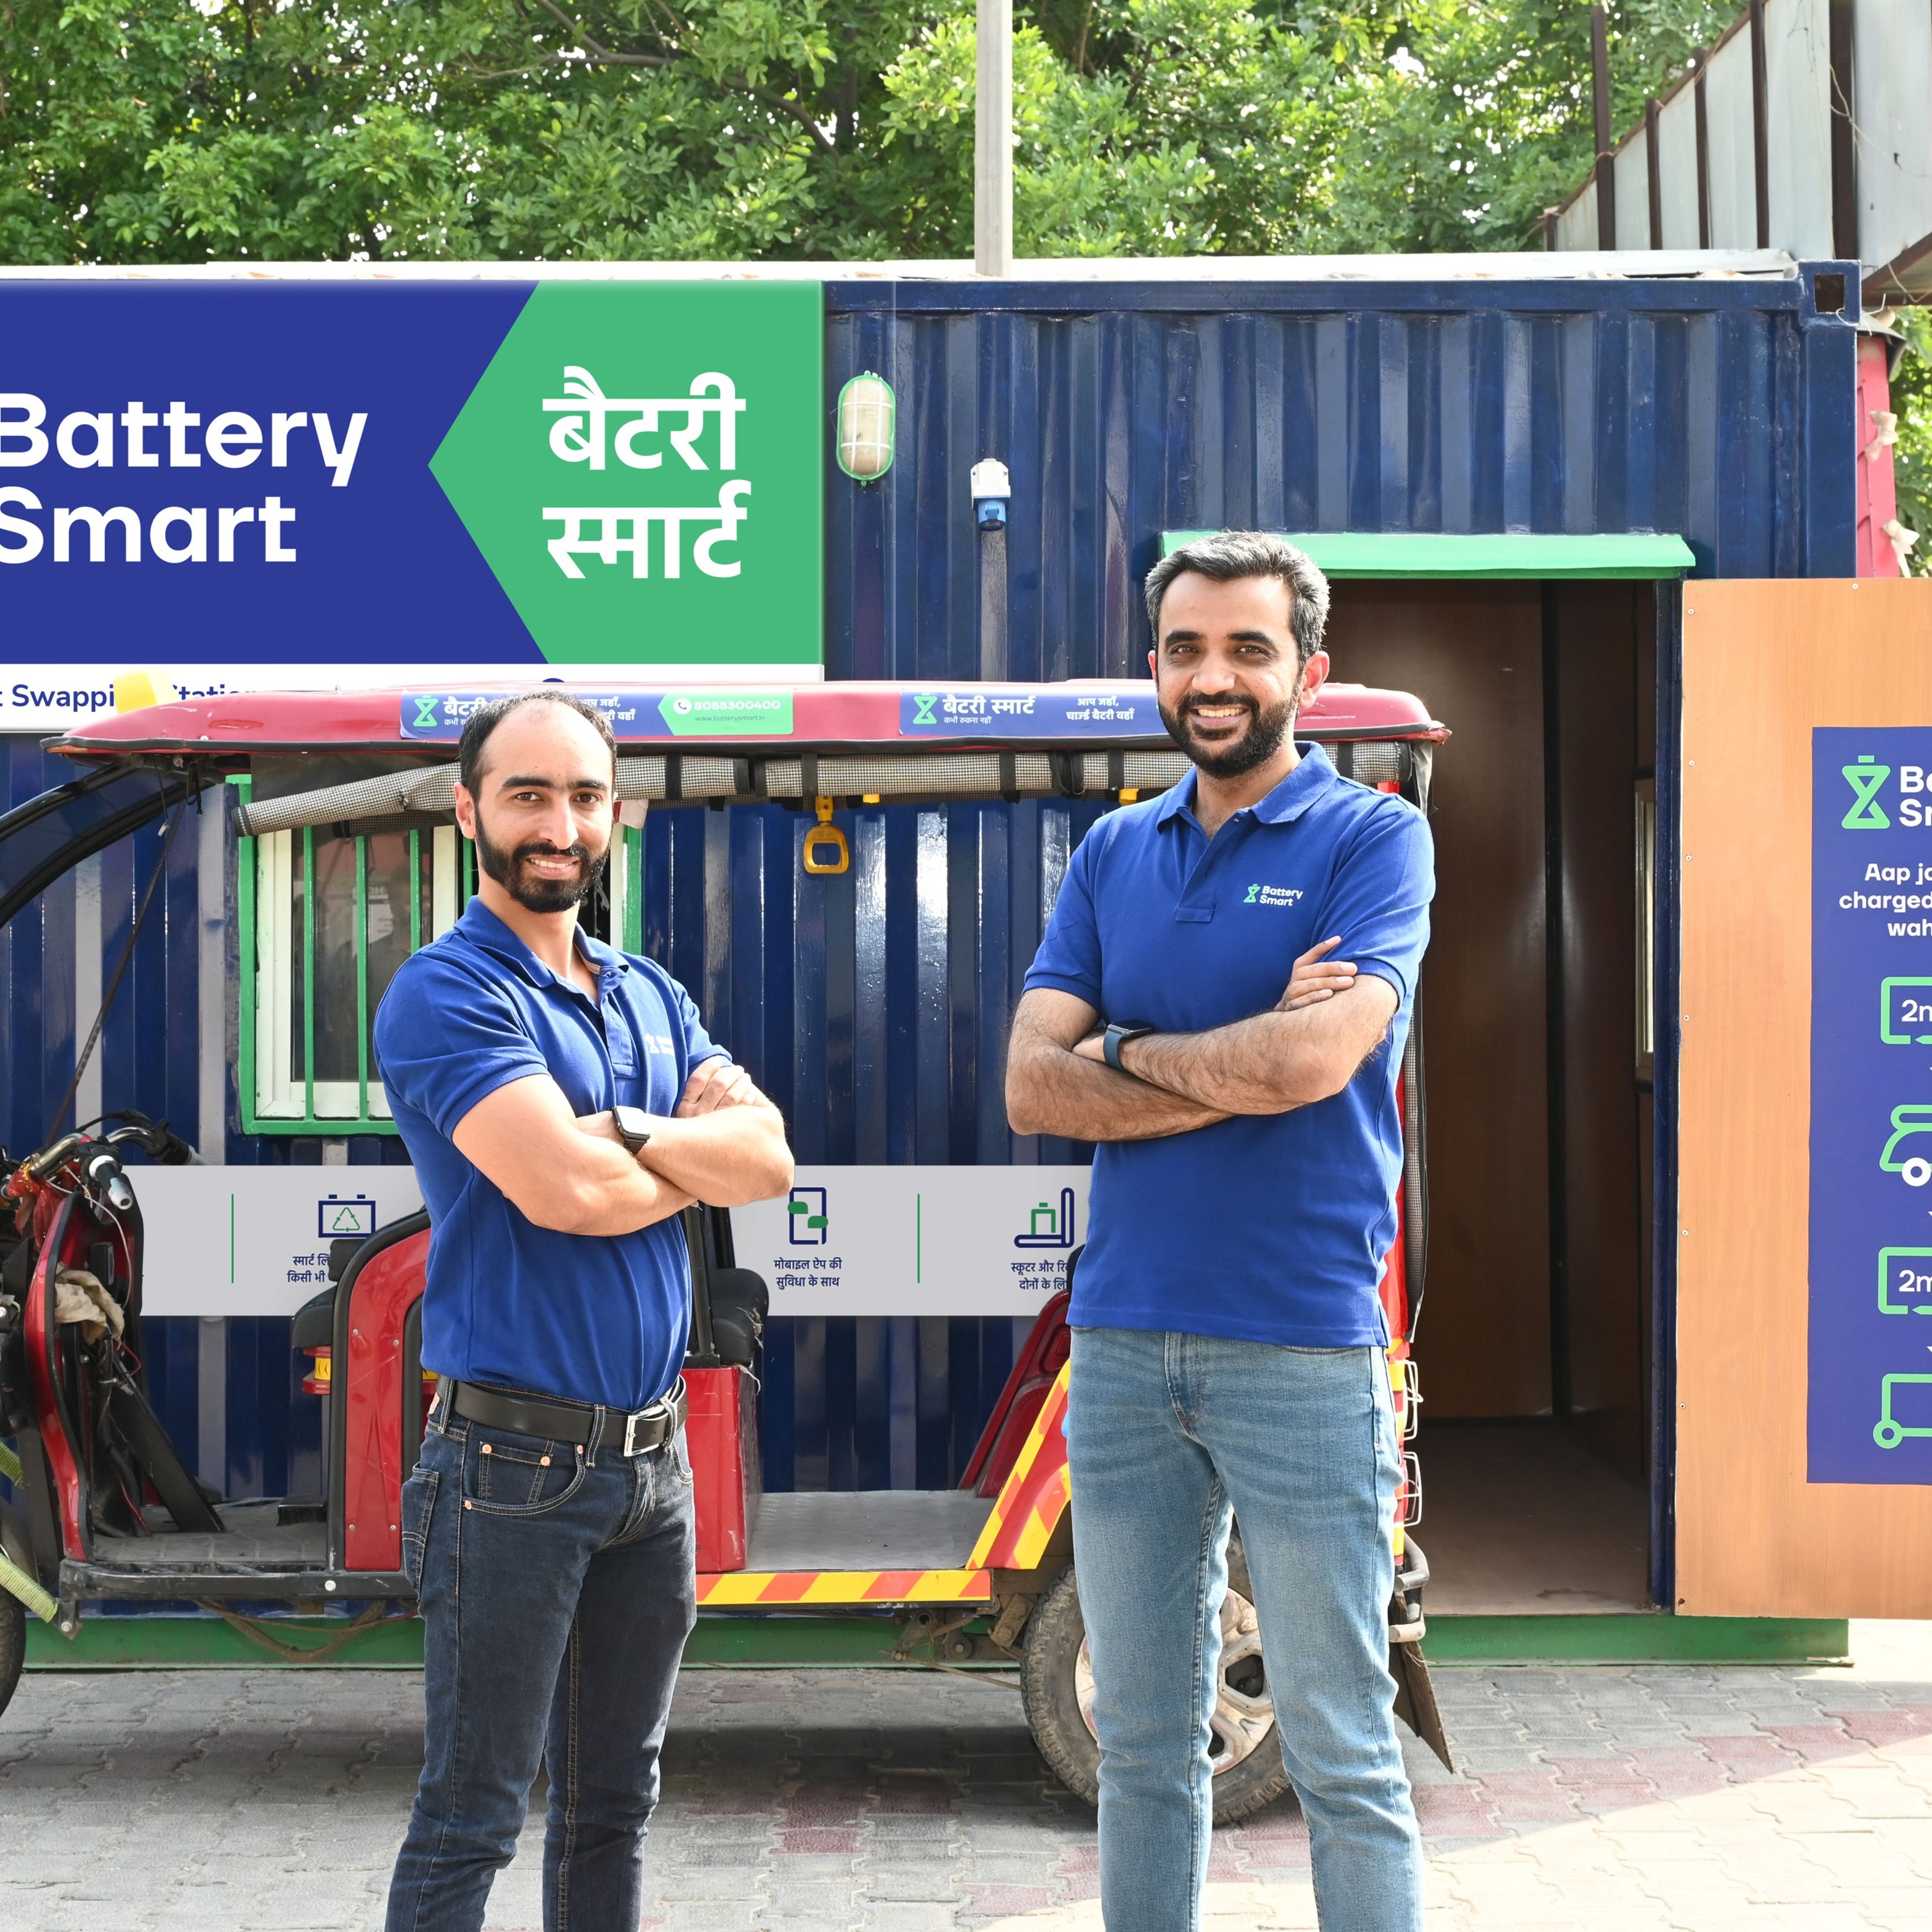 Battery Smart raises $65M in Series B funding round led by LeapFrog Investments